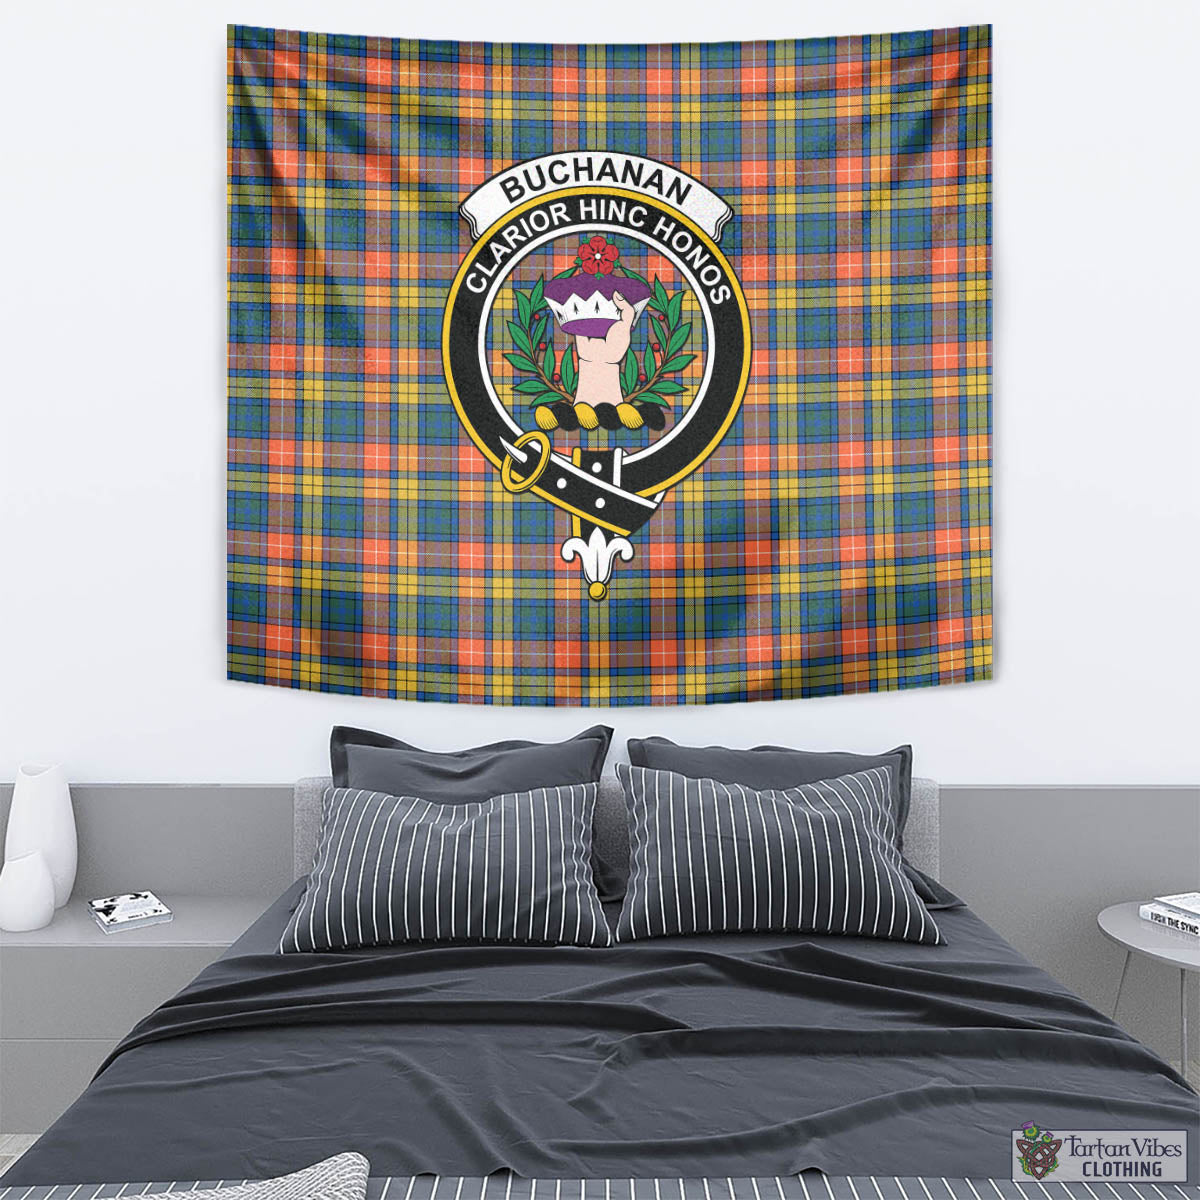 Tartan Vibes Clothing Buchanan Ancient Tartan Tapestry Wall Hanging and Home Decor for Room with Family Crest